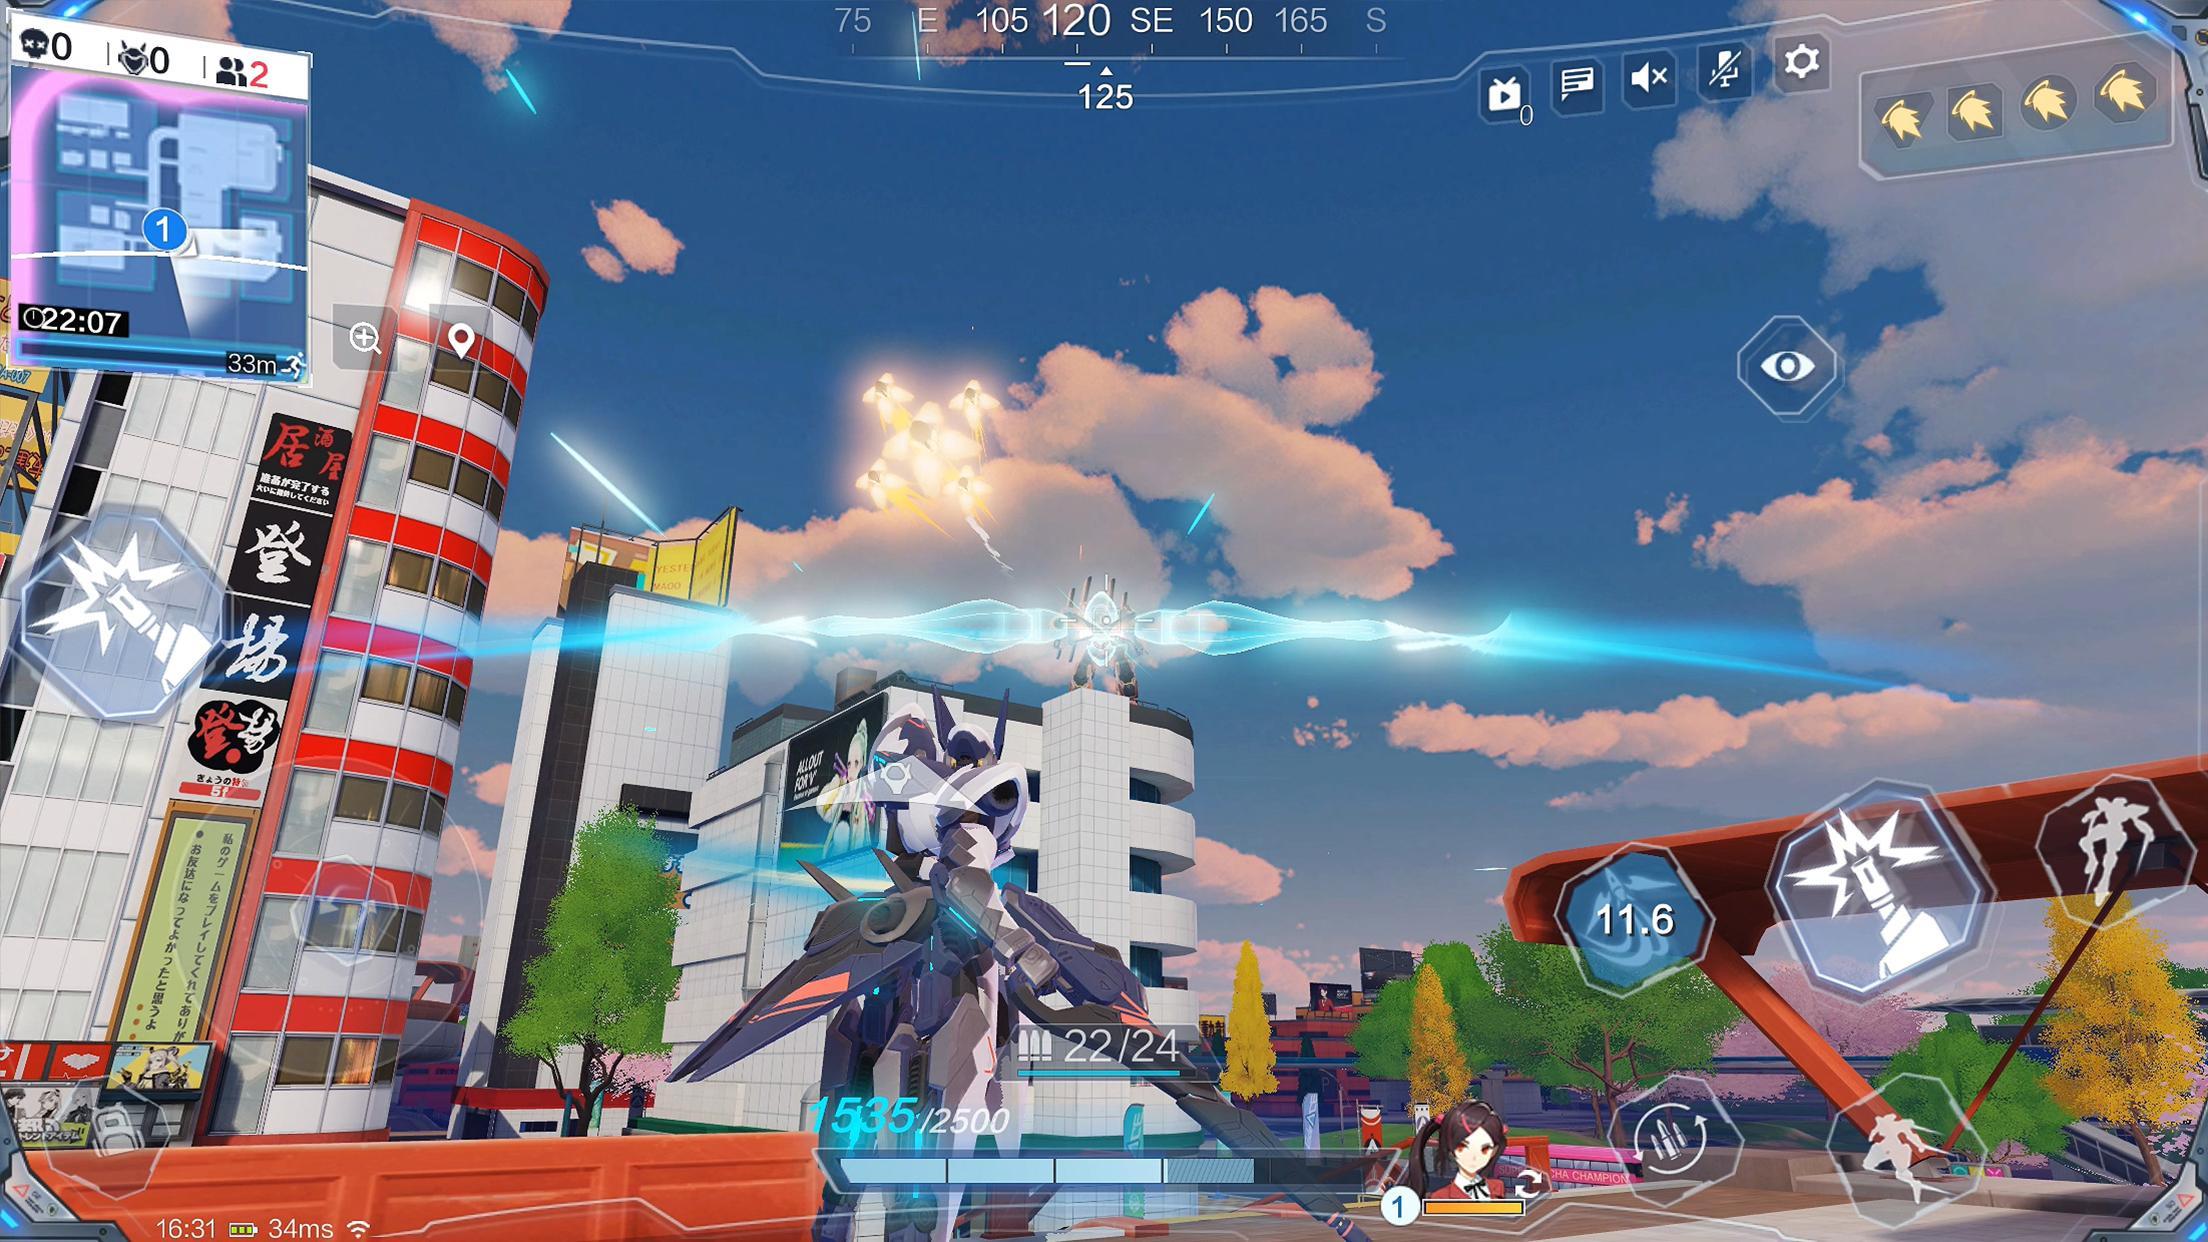 Super Mecha Champions for Android - APK Download2208 x 1242